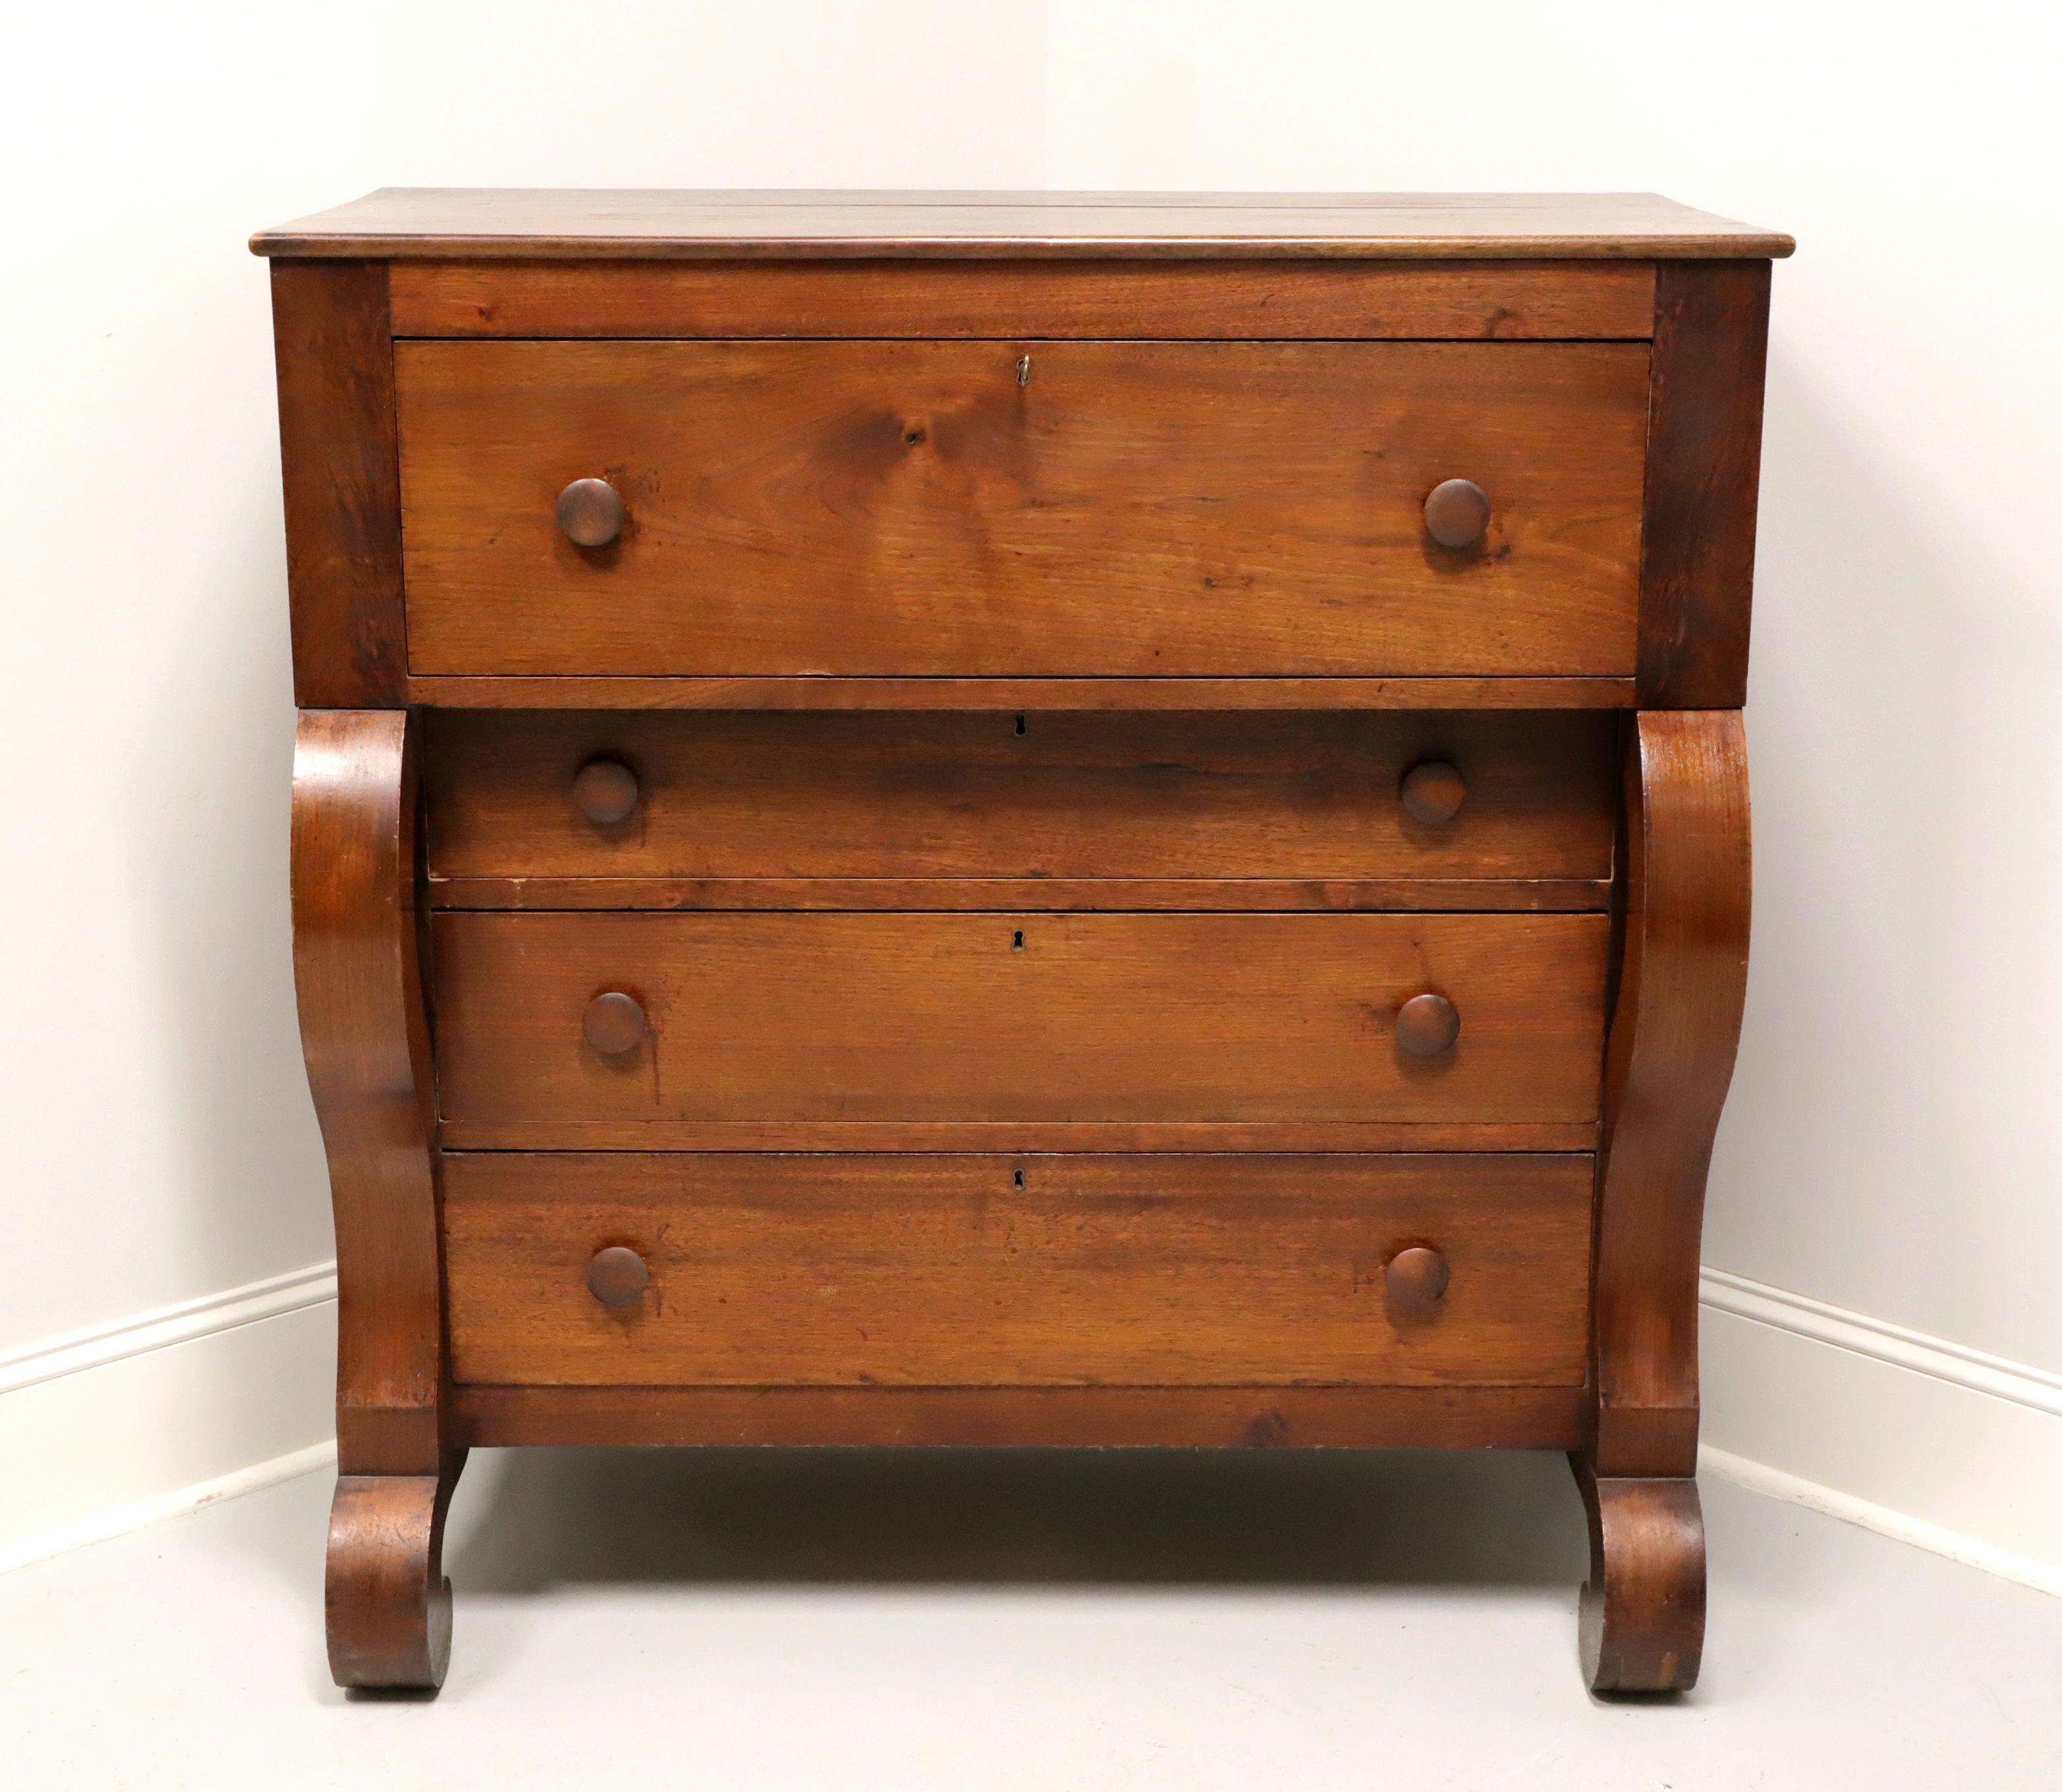 An antique Empire style chest of drawers, unbranded. Solid mahogany with classic Empire styling, with curved outward sides and curved back front feet. Features four drawers of dovetail construction with wooden knobs and locks. Includes one key. Made